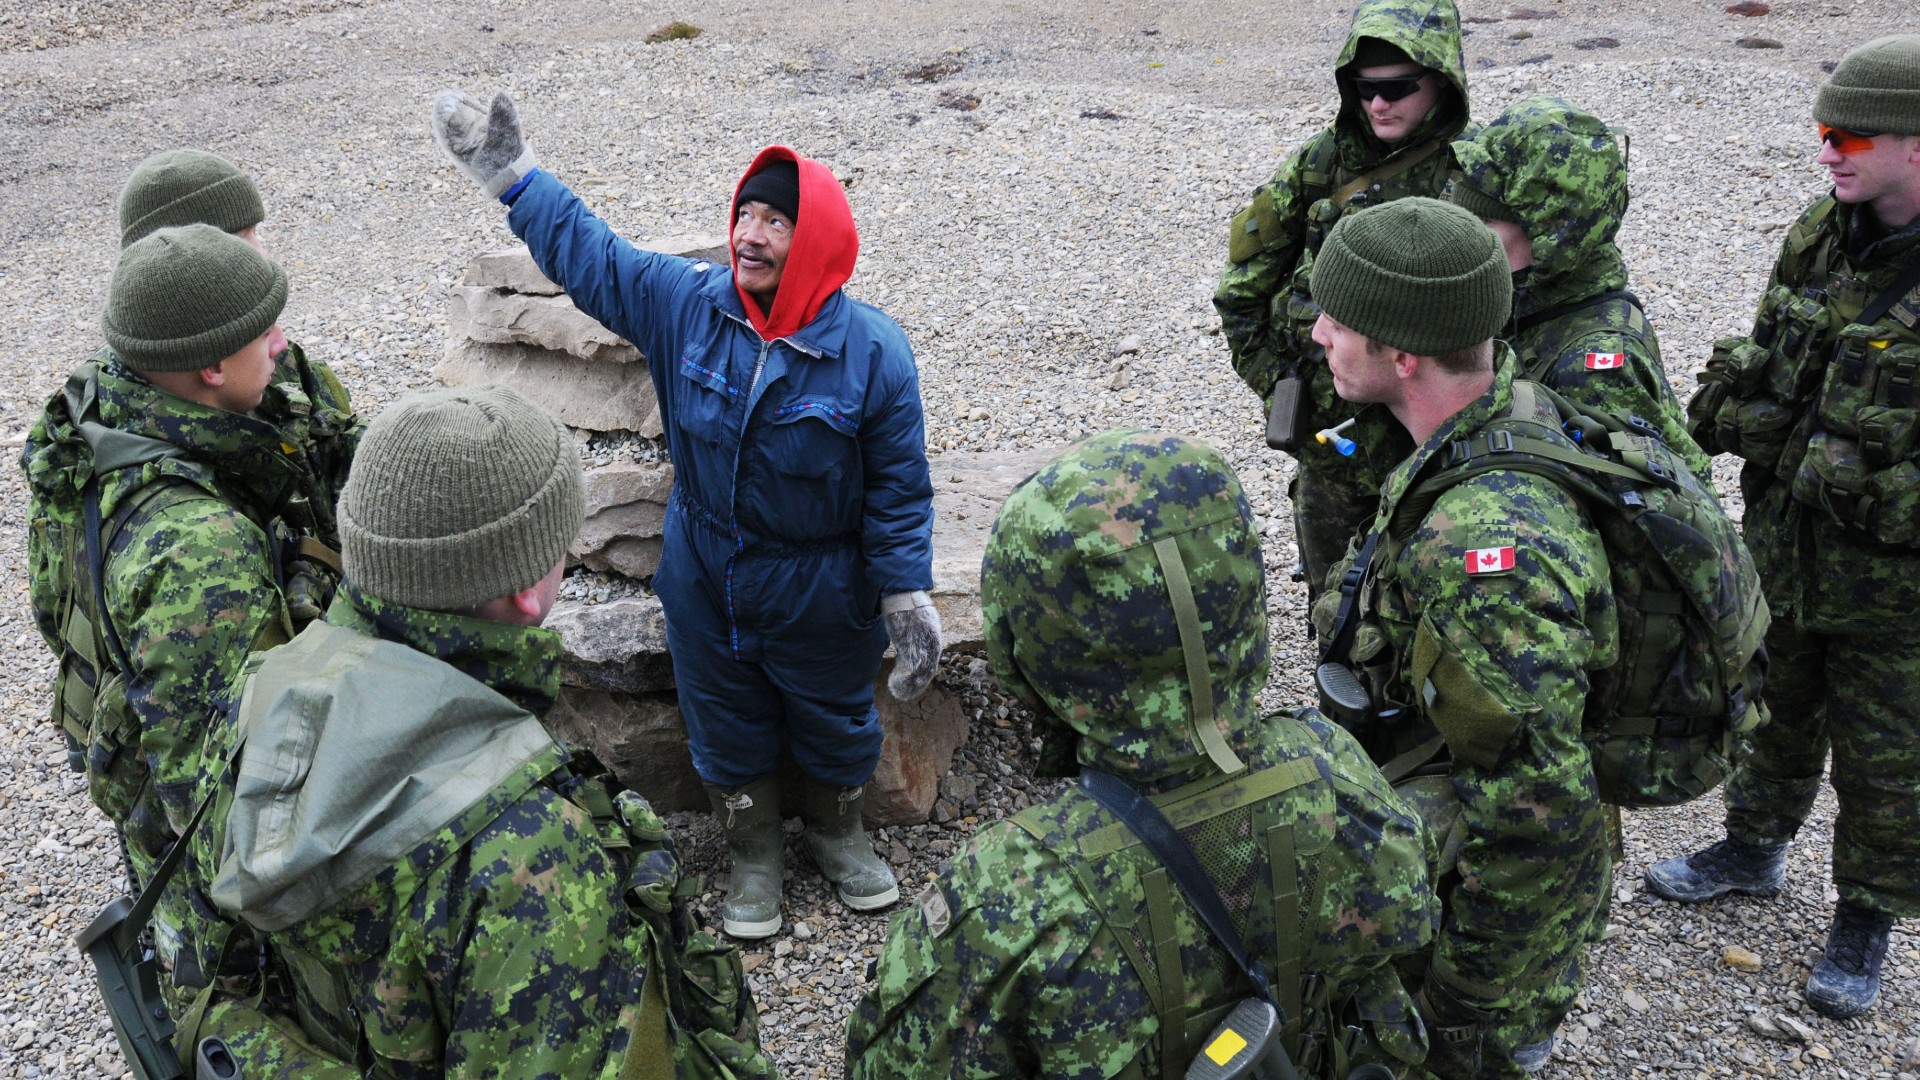 Paul Atagoota of 1 Canadian Ranger Patrol Group shares his knowledge about Inukshuks with the soldiers of 32 Brigade in Resolute Bay, Nunavut, during the 2010 iteration of Operation Nanook, a recurring Canadian Forces operation that takes place in northern Canada. (Sgt Marco Comisso/Canadian Armed Forces)